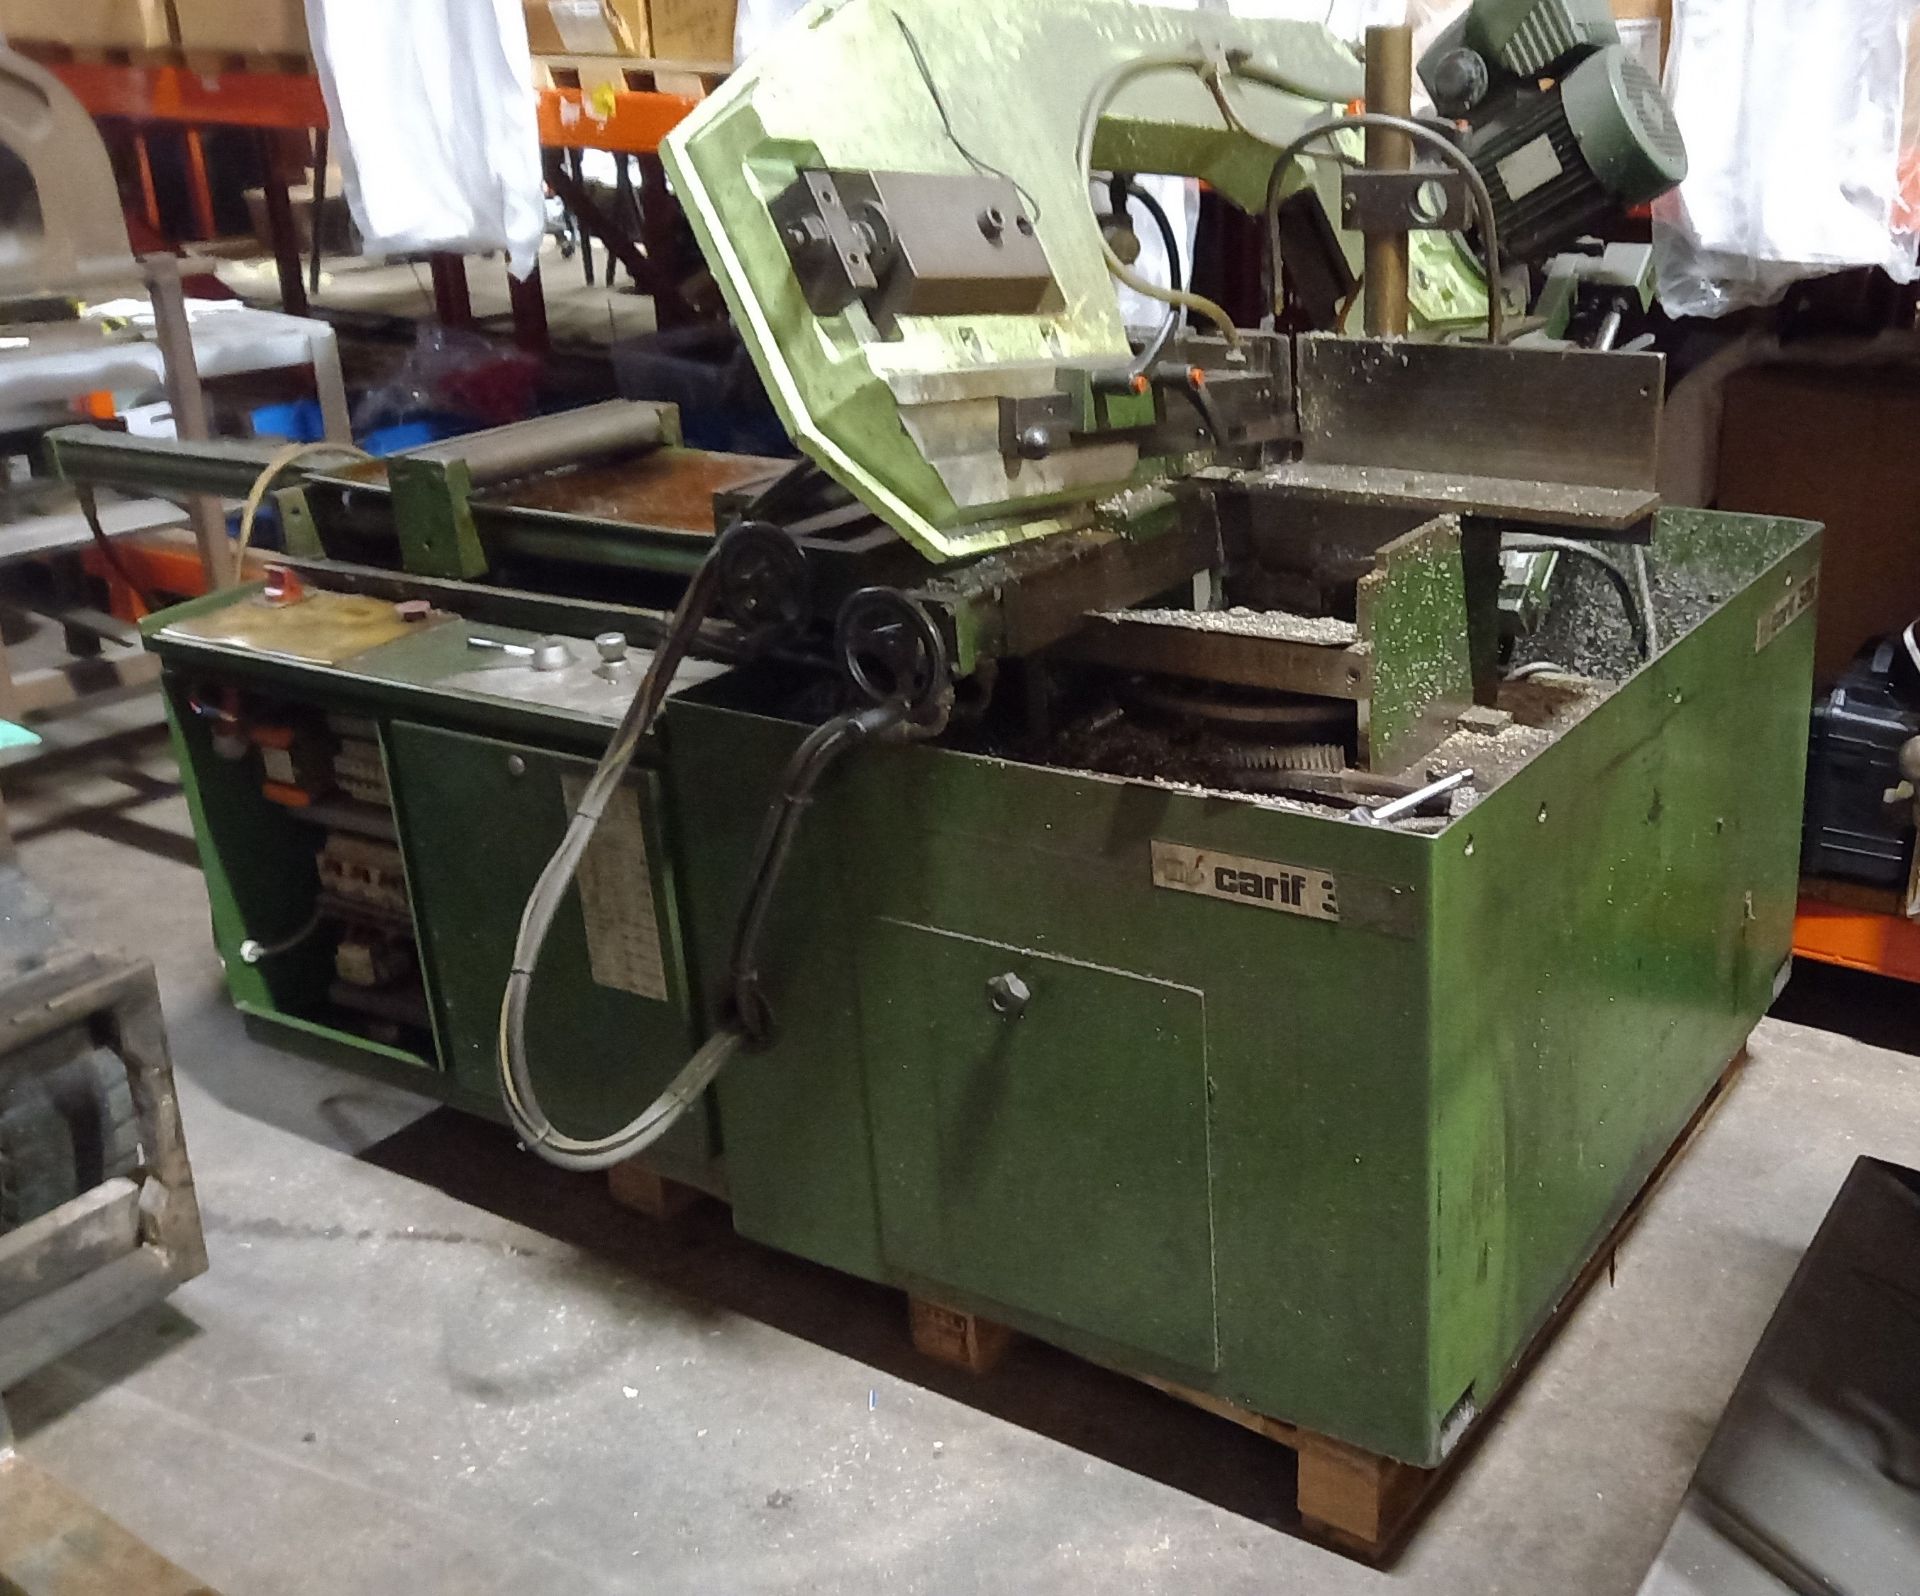 CARIF 320 BANDSAW (NO ELECTRICAL COVER THEREFORE TO BE SOLD AS SPARE / REPAIR)